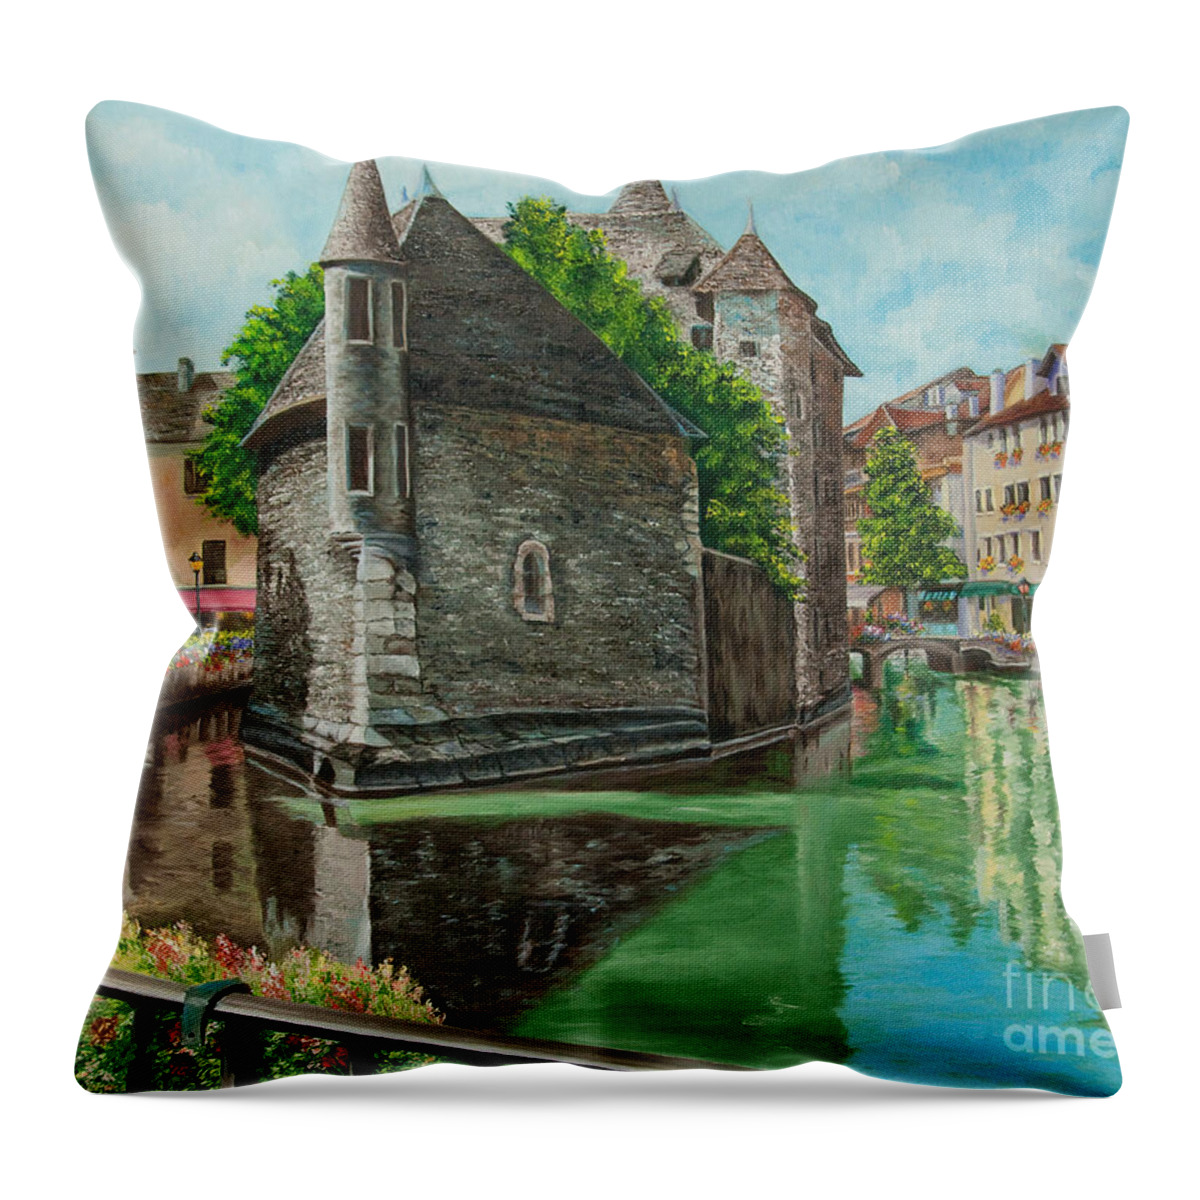 Annecy France Art Throw Pillow featuring the painting Annecy-The Venice Of France by Charlotte Blanchard